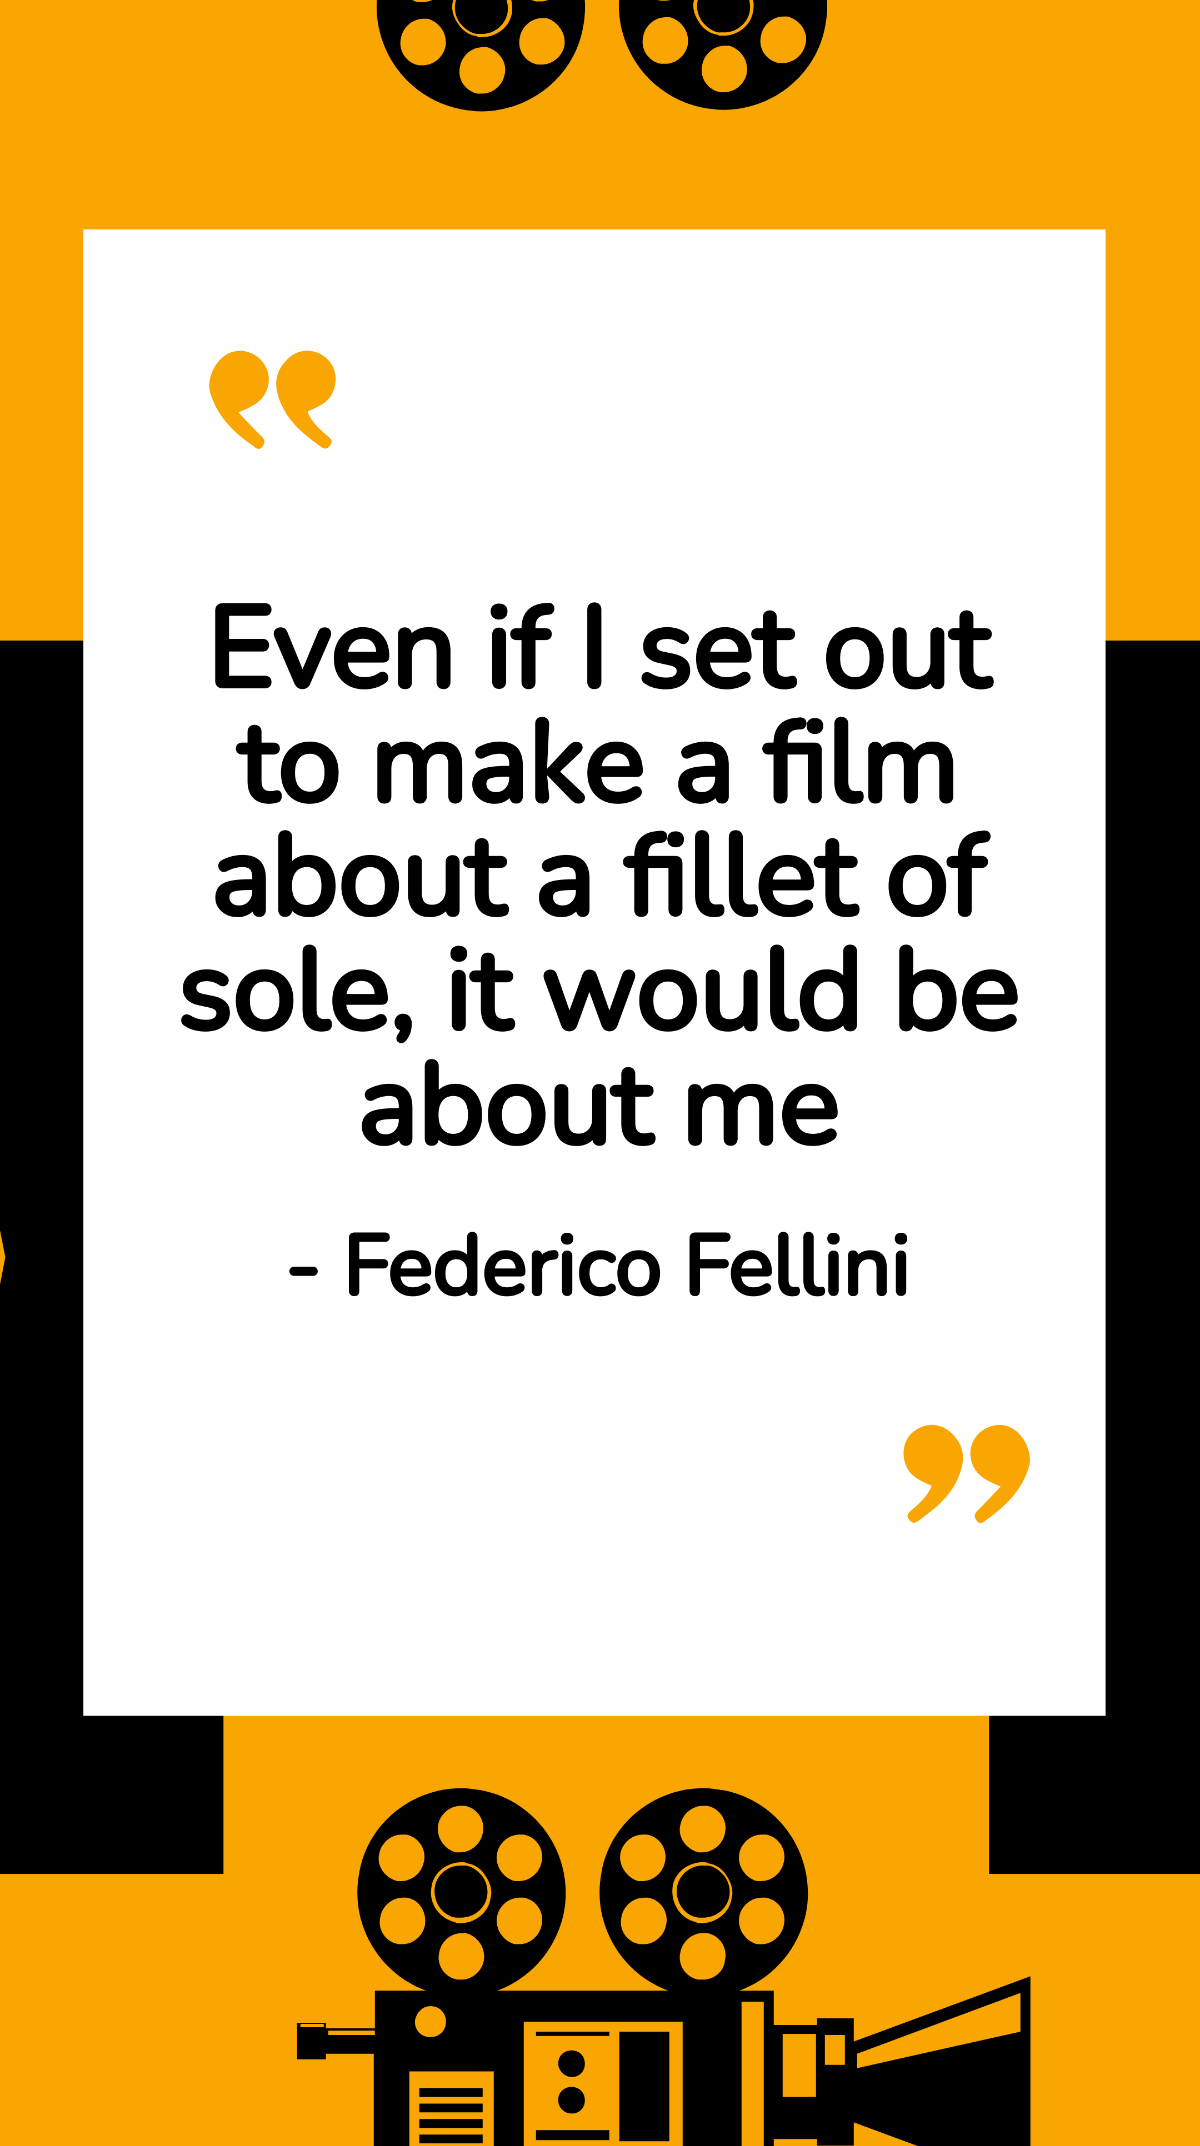 Federico Fellini - Even if I set out to make a film about a fillet of sole, it would be about me